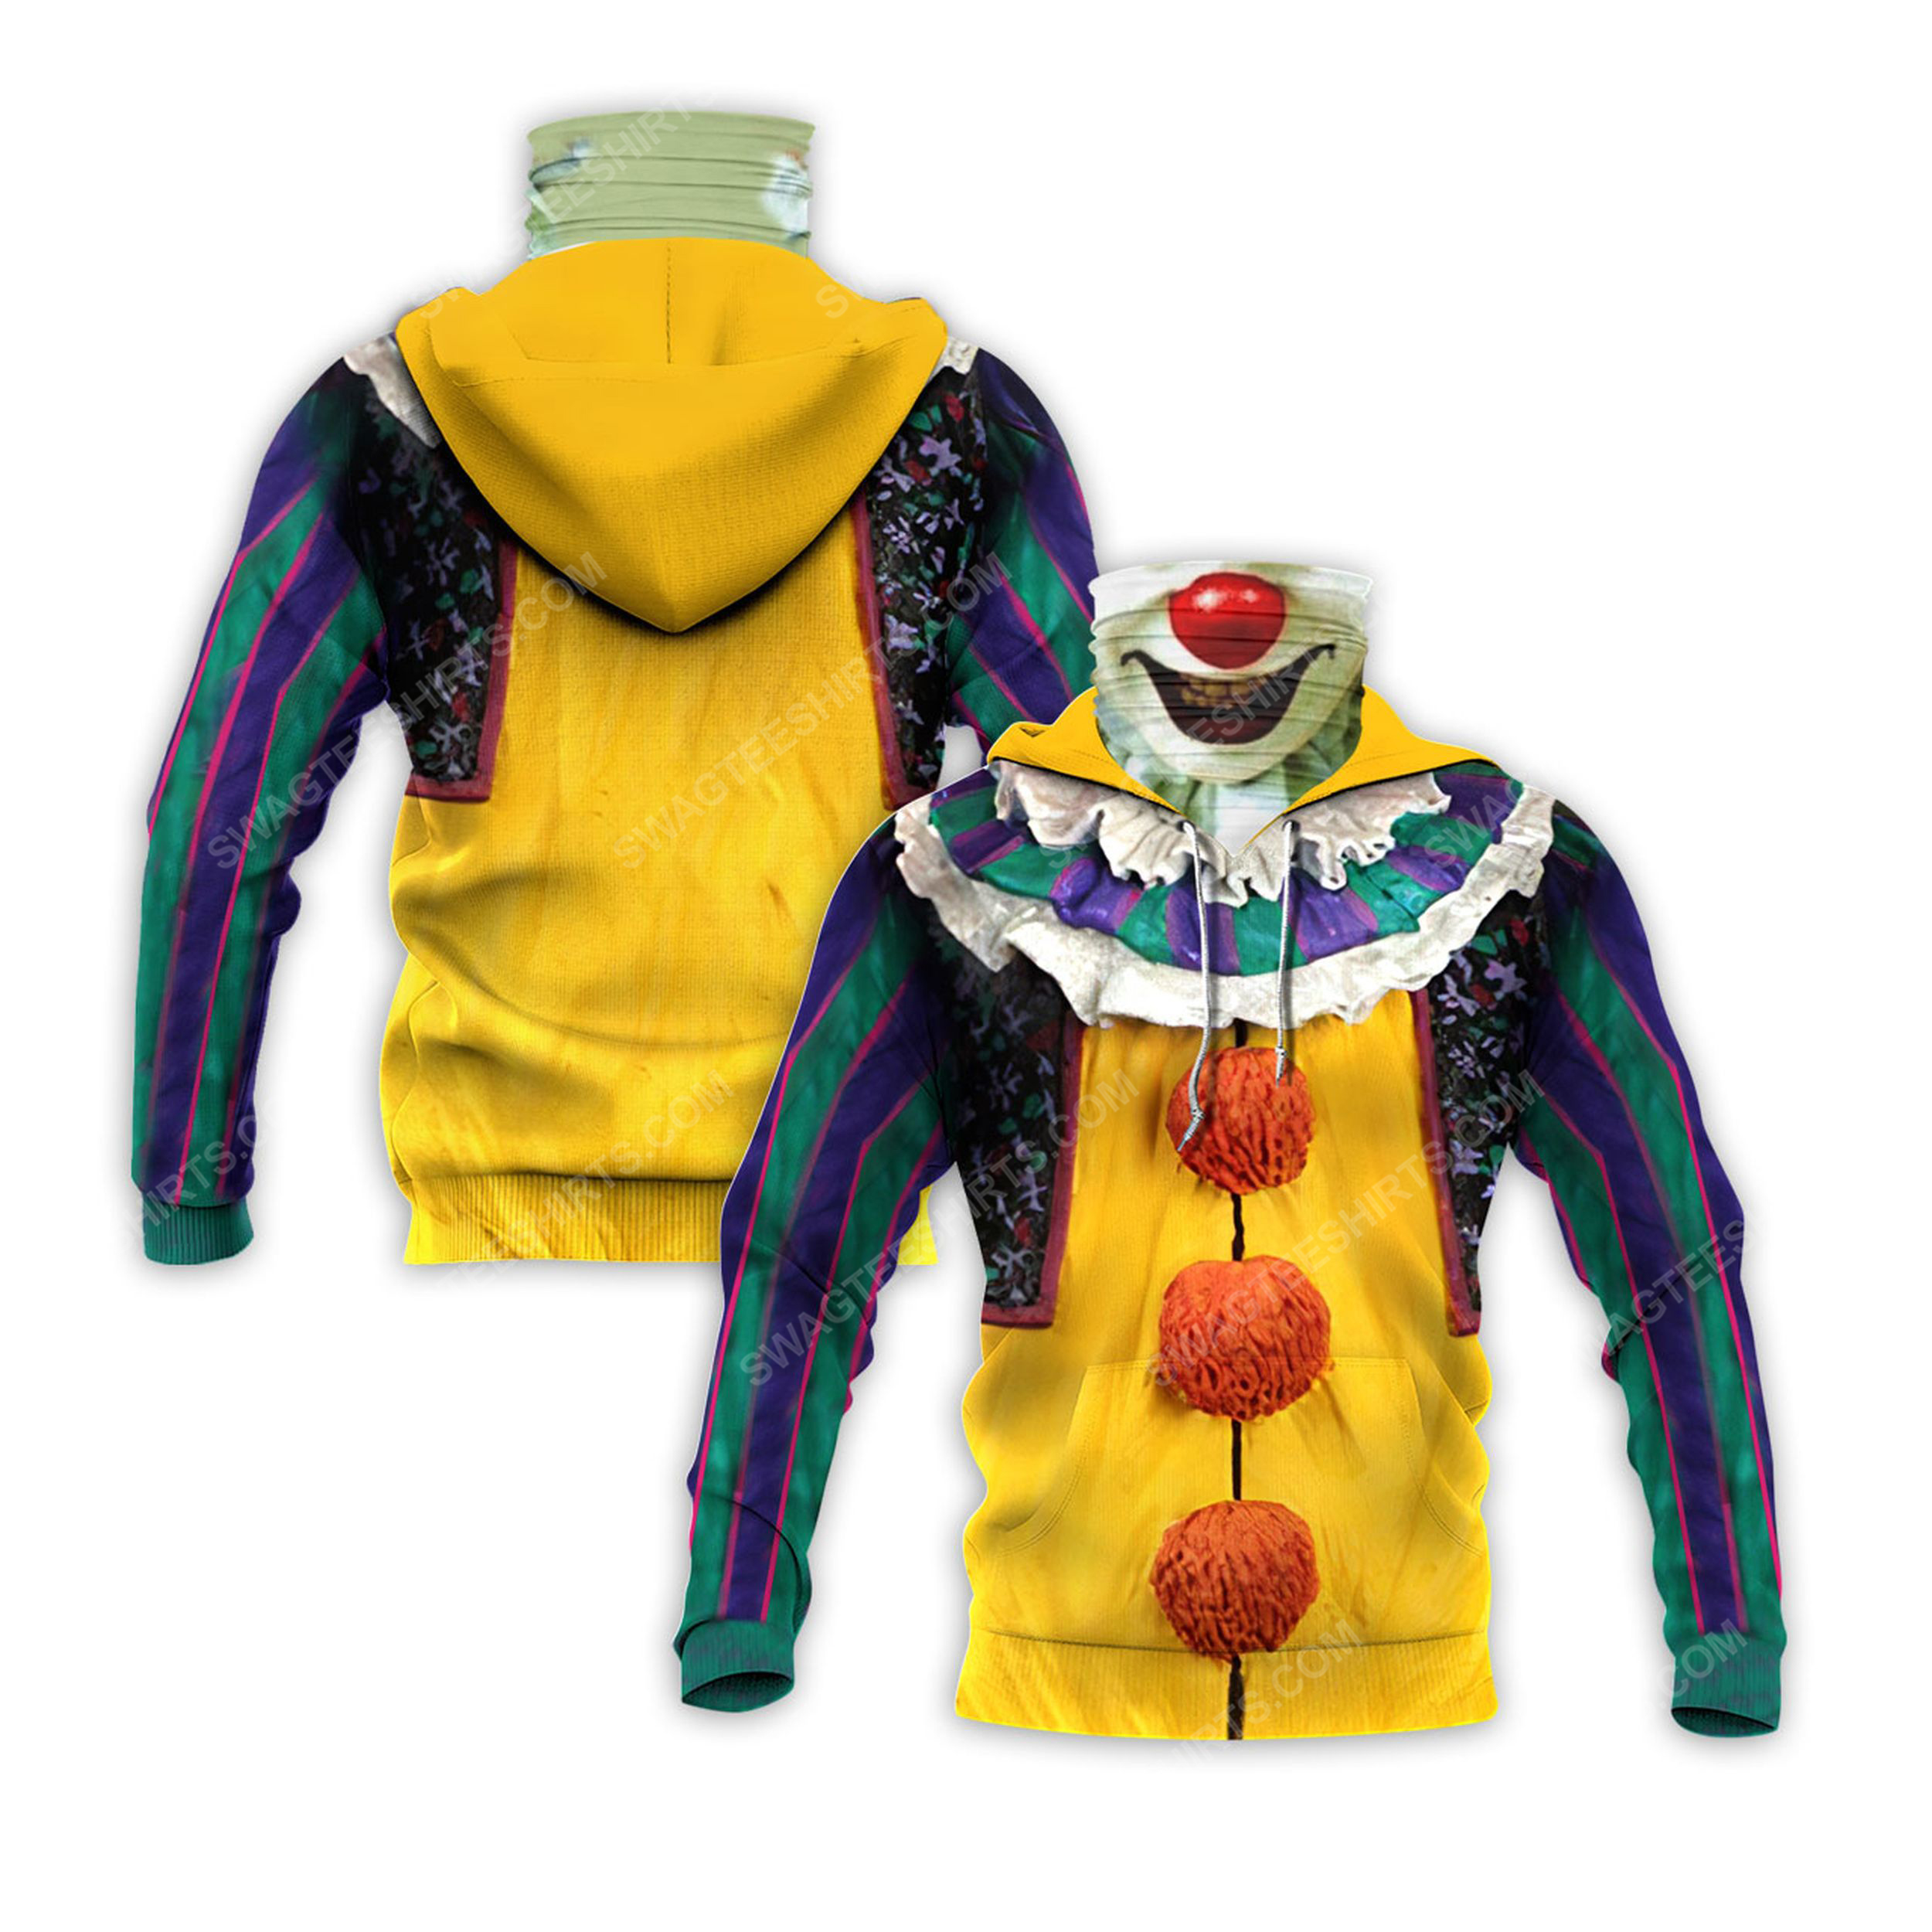 [special edition] Pennywise the dancing clown for halloween full print mask hoodie – maria